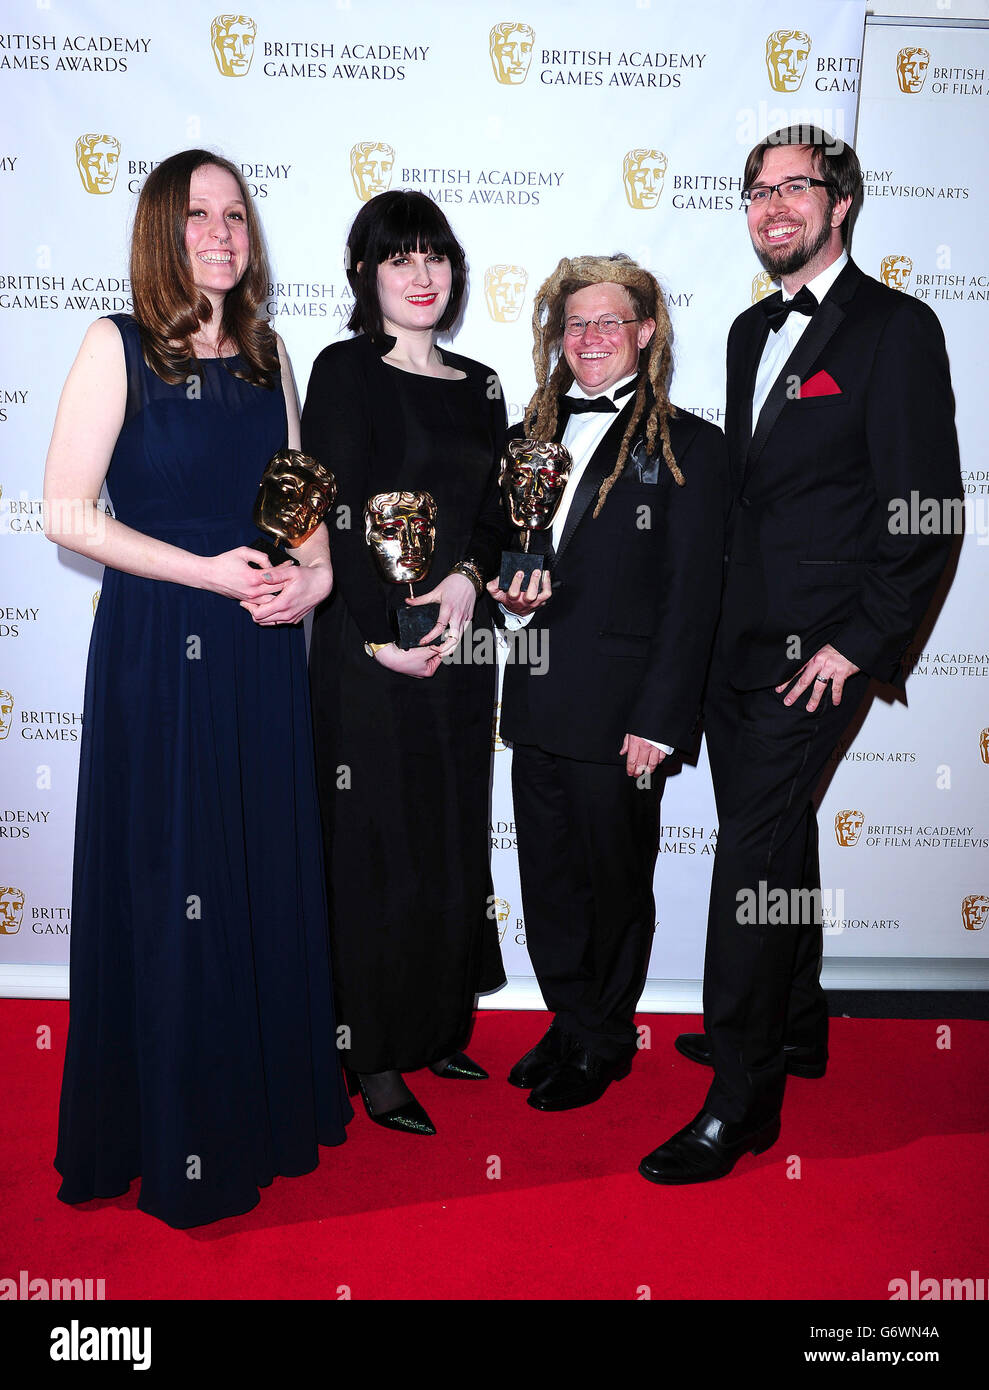 The Development Team of the Fullbright Company with the Debut Game award, for Gone Home at the British Academy Games Awards at Tobacco Dock, London. Stock Photo